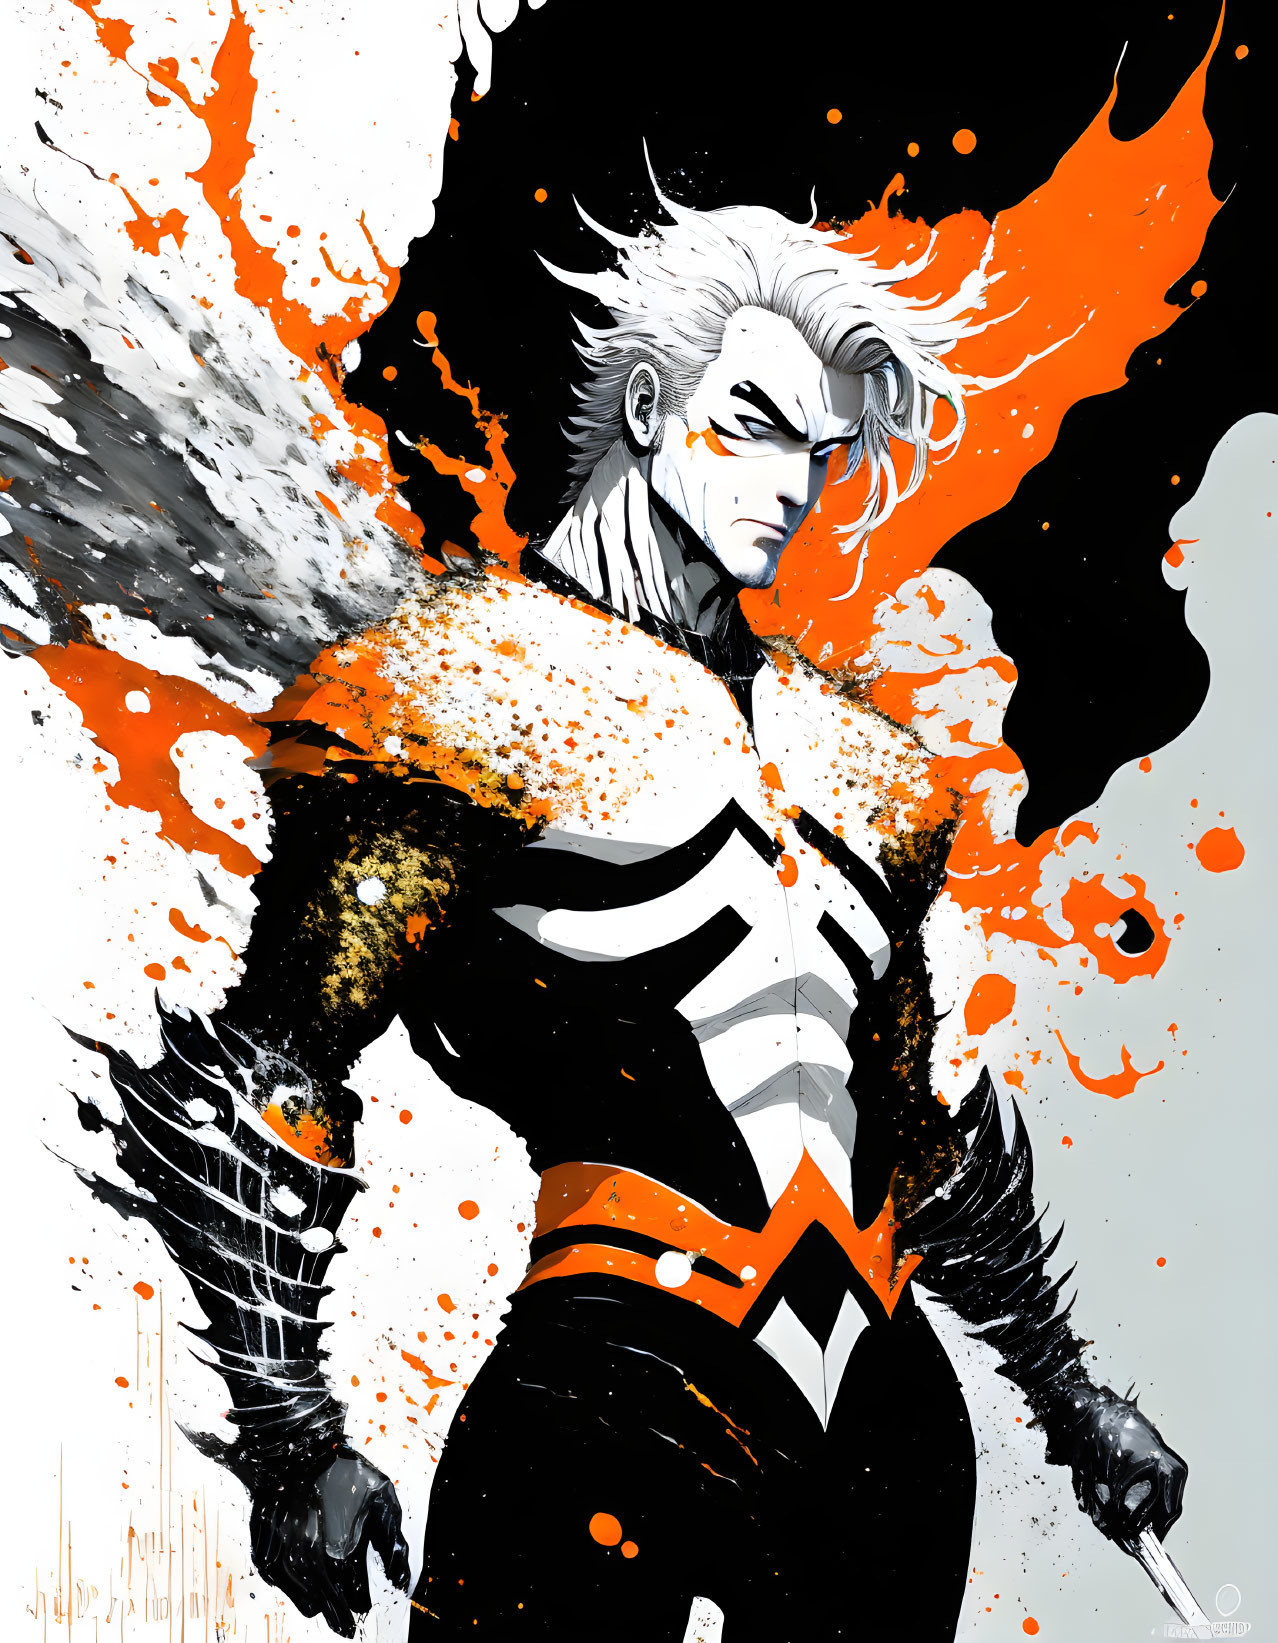 Male superhero illustration with confident stance in orange and white splashes